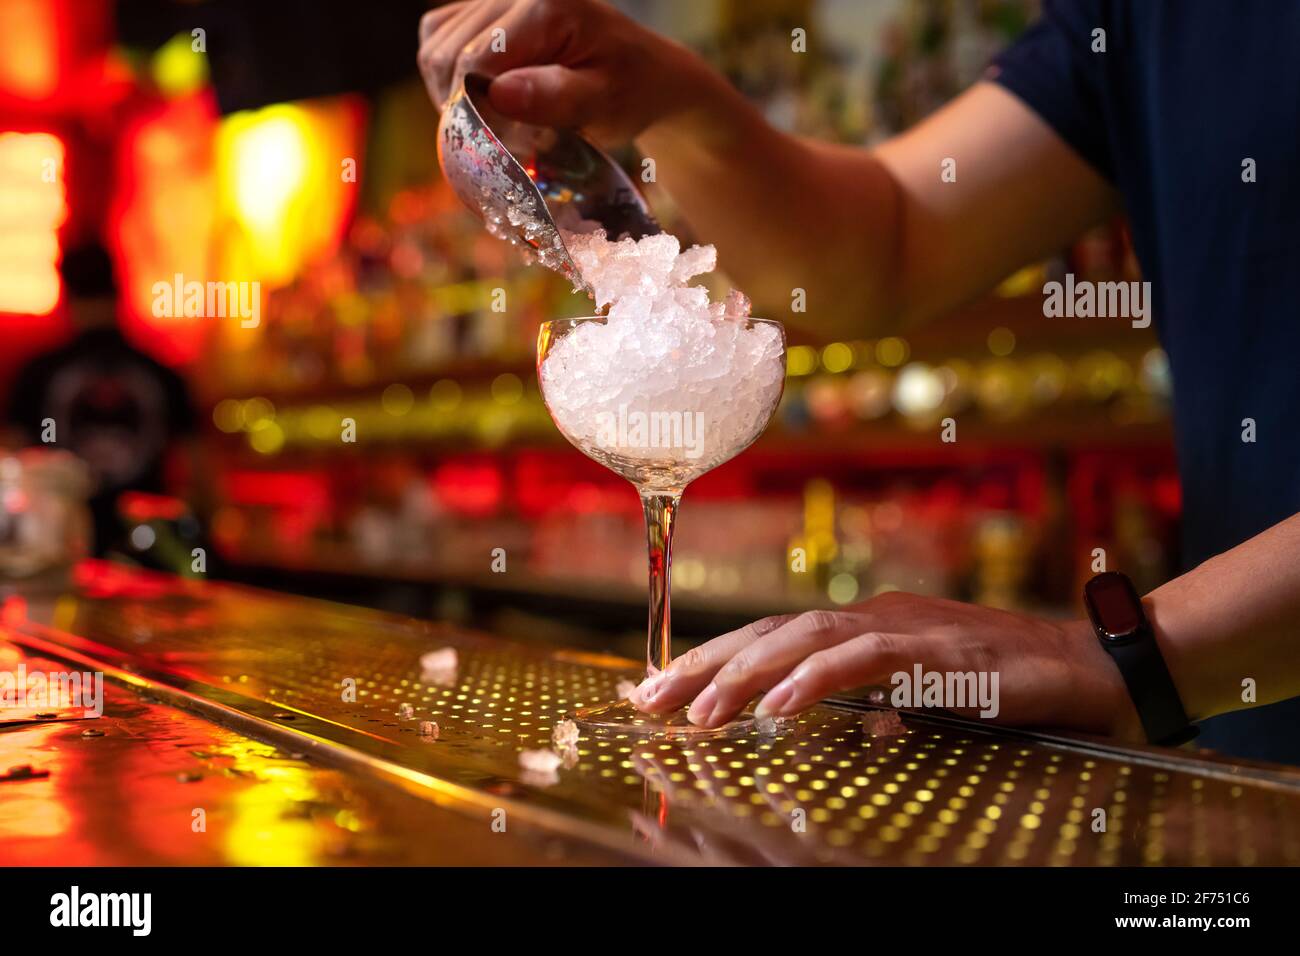 https://c8.alamy.com/comp/2F751C6/hands-of-unrecognizable-bartender-putting-crushed-ice-into-the-cup-while-preparing-a-cocktail-in-the-bar-2F751C6.jpg